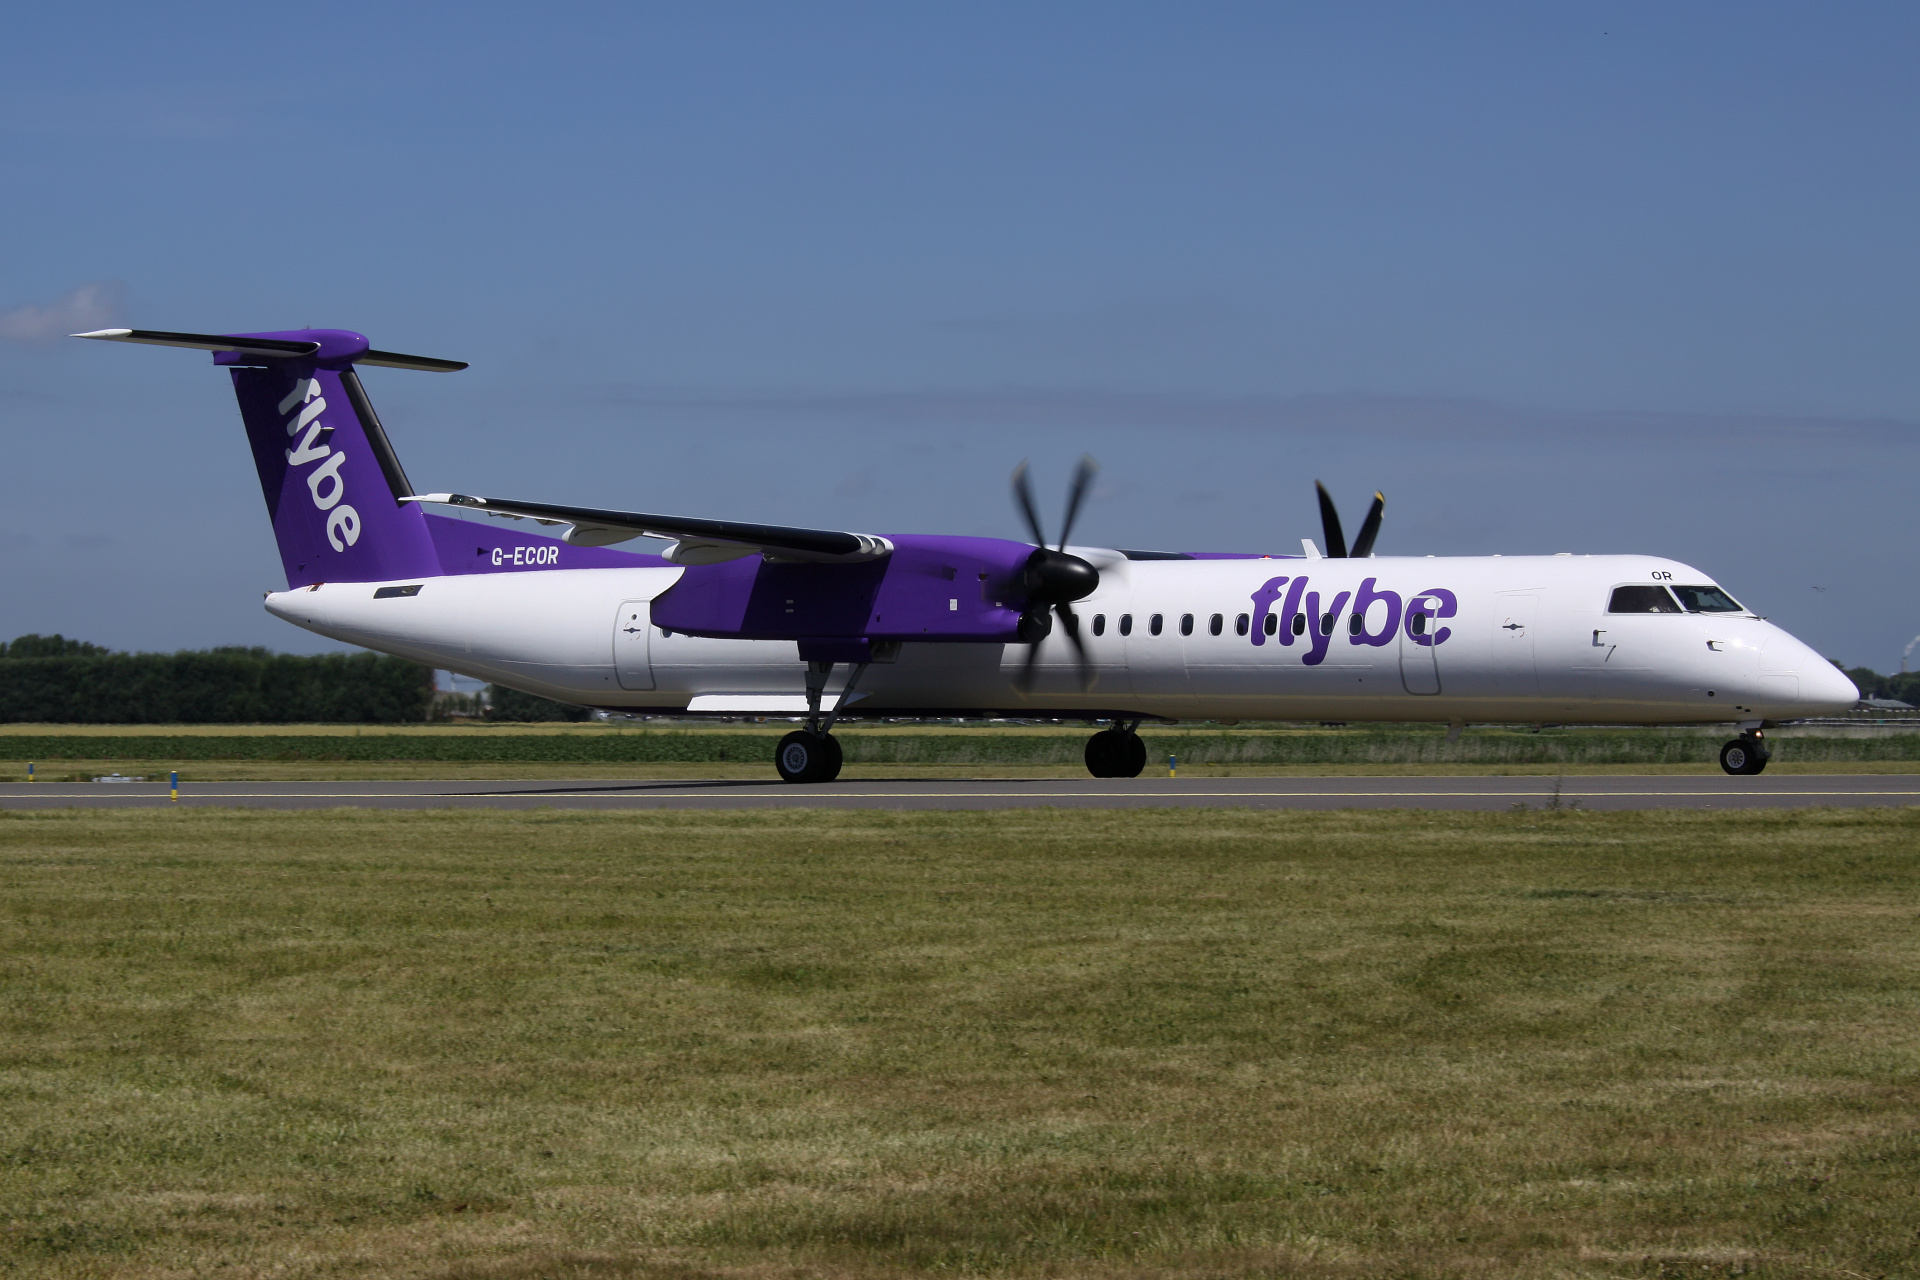 G-ECOR (Aircraft » Schiphol Spotting » Bombardier Q400 Dash 8 » FlyBe)